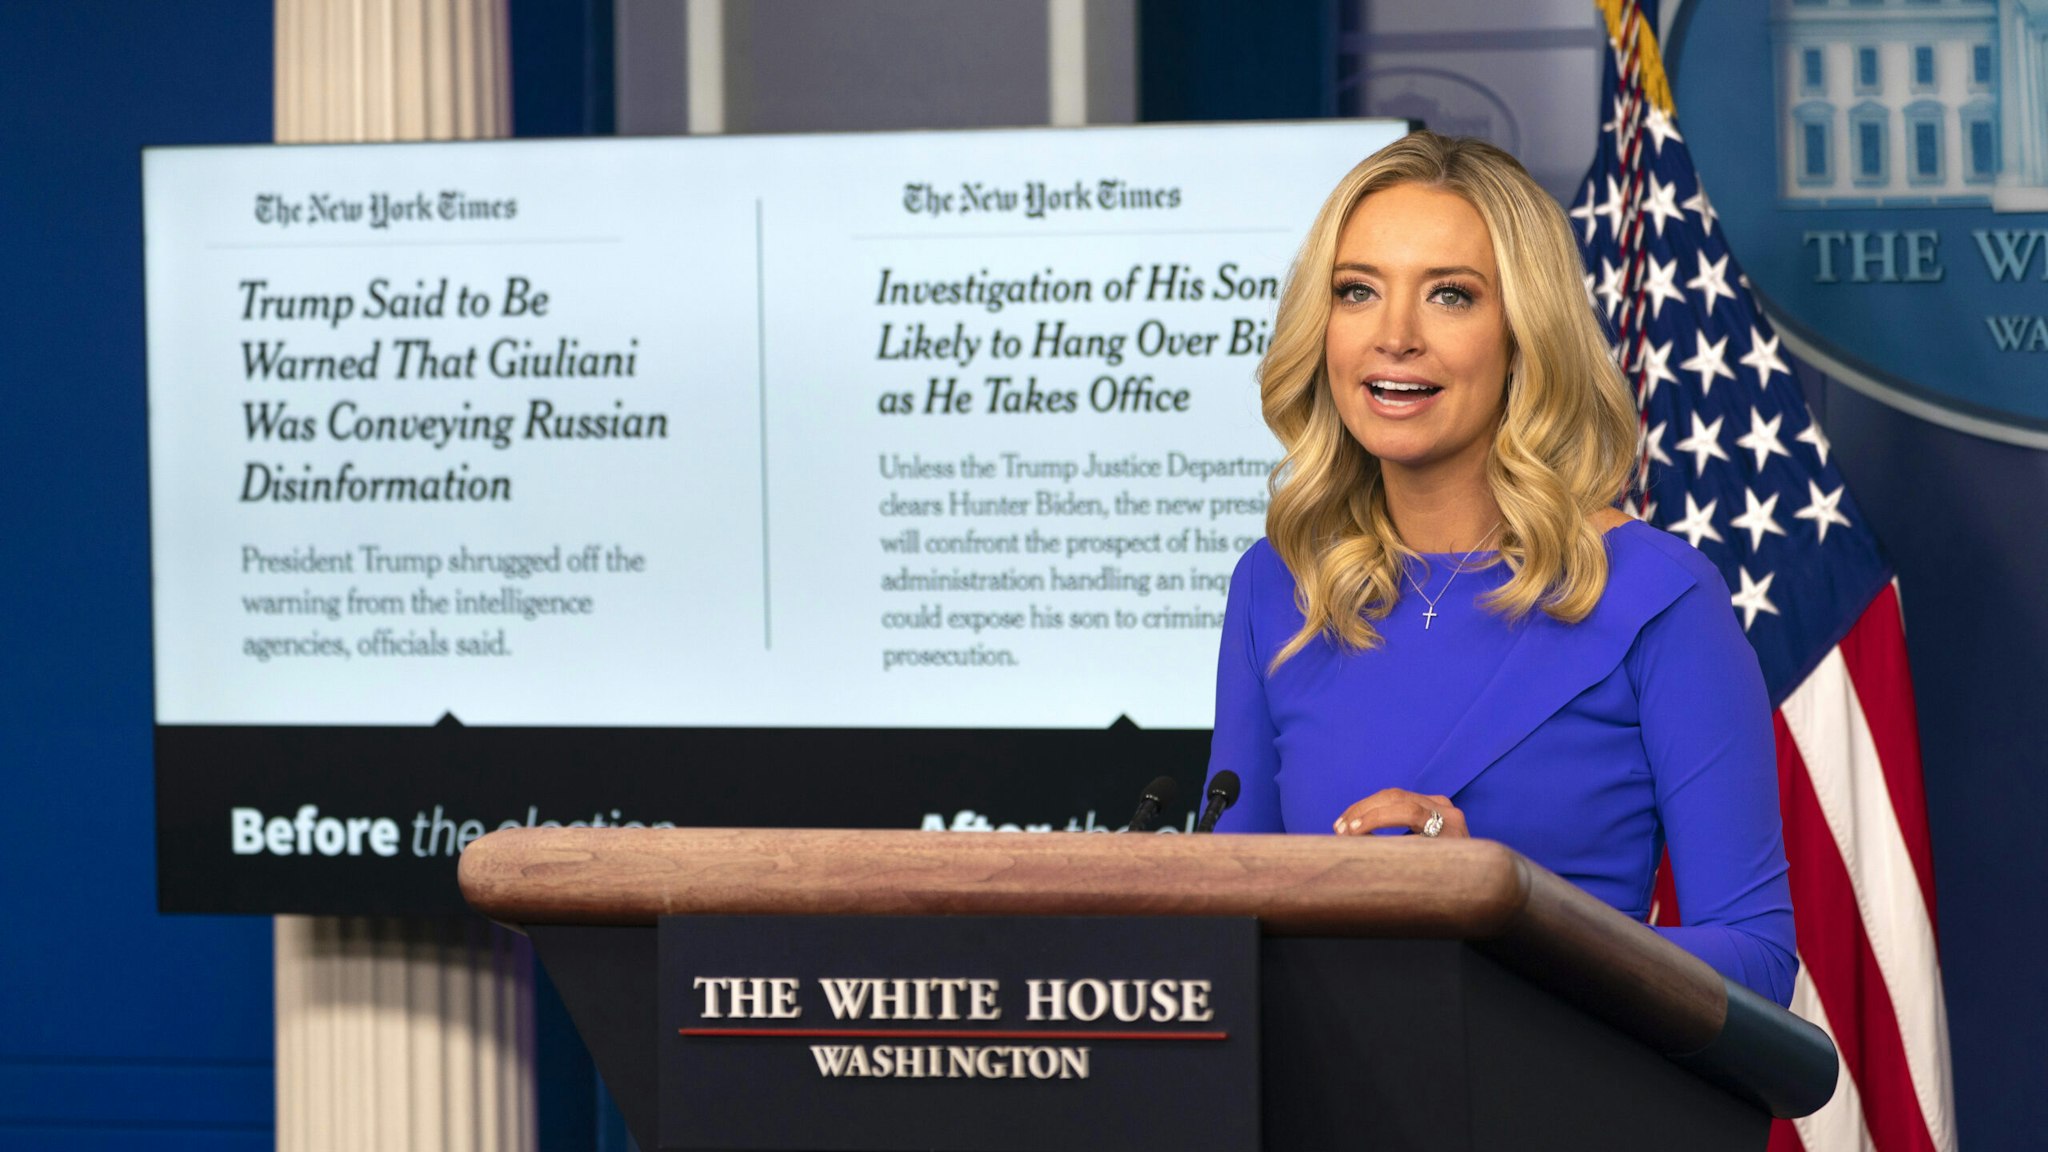 Kayleigh McEnany, White House press secretary, speaks during a news conference in Washington, D.C., U.S., on Tuesday, Dec. 15, 2020. Senate Majority Leader Mitch McConnell recognized Joe Biden as the winner of the U.S. election the day after the Electoral College confirmed his victory a pivotal moment that further cements President Donald Trump's defeat. 